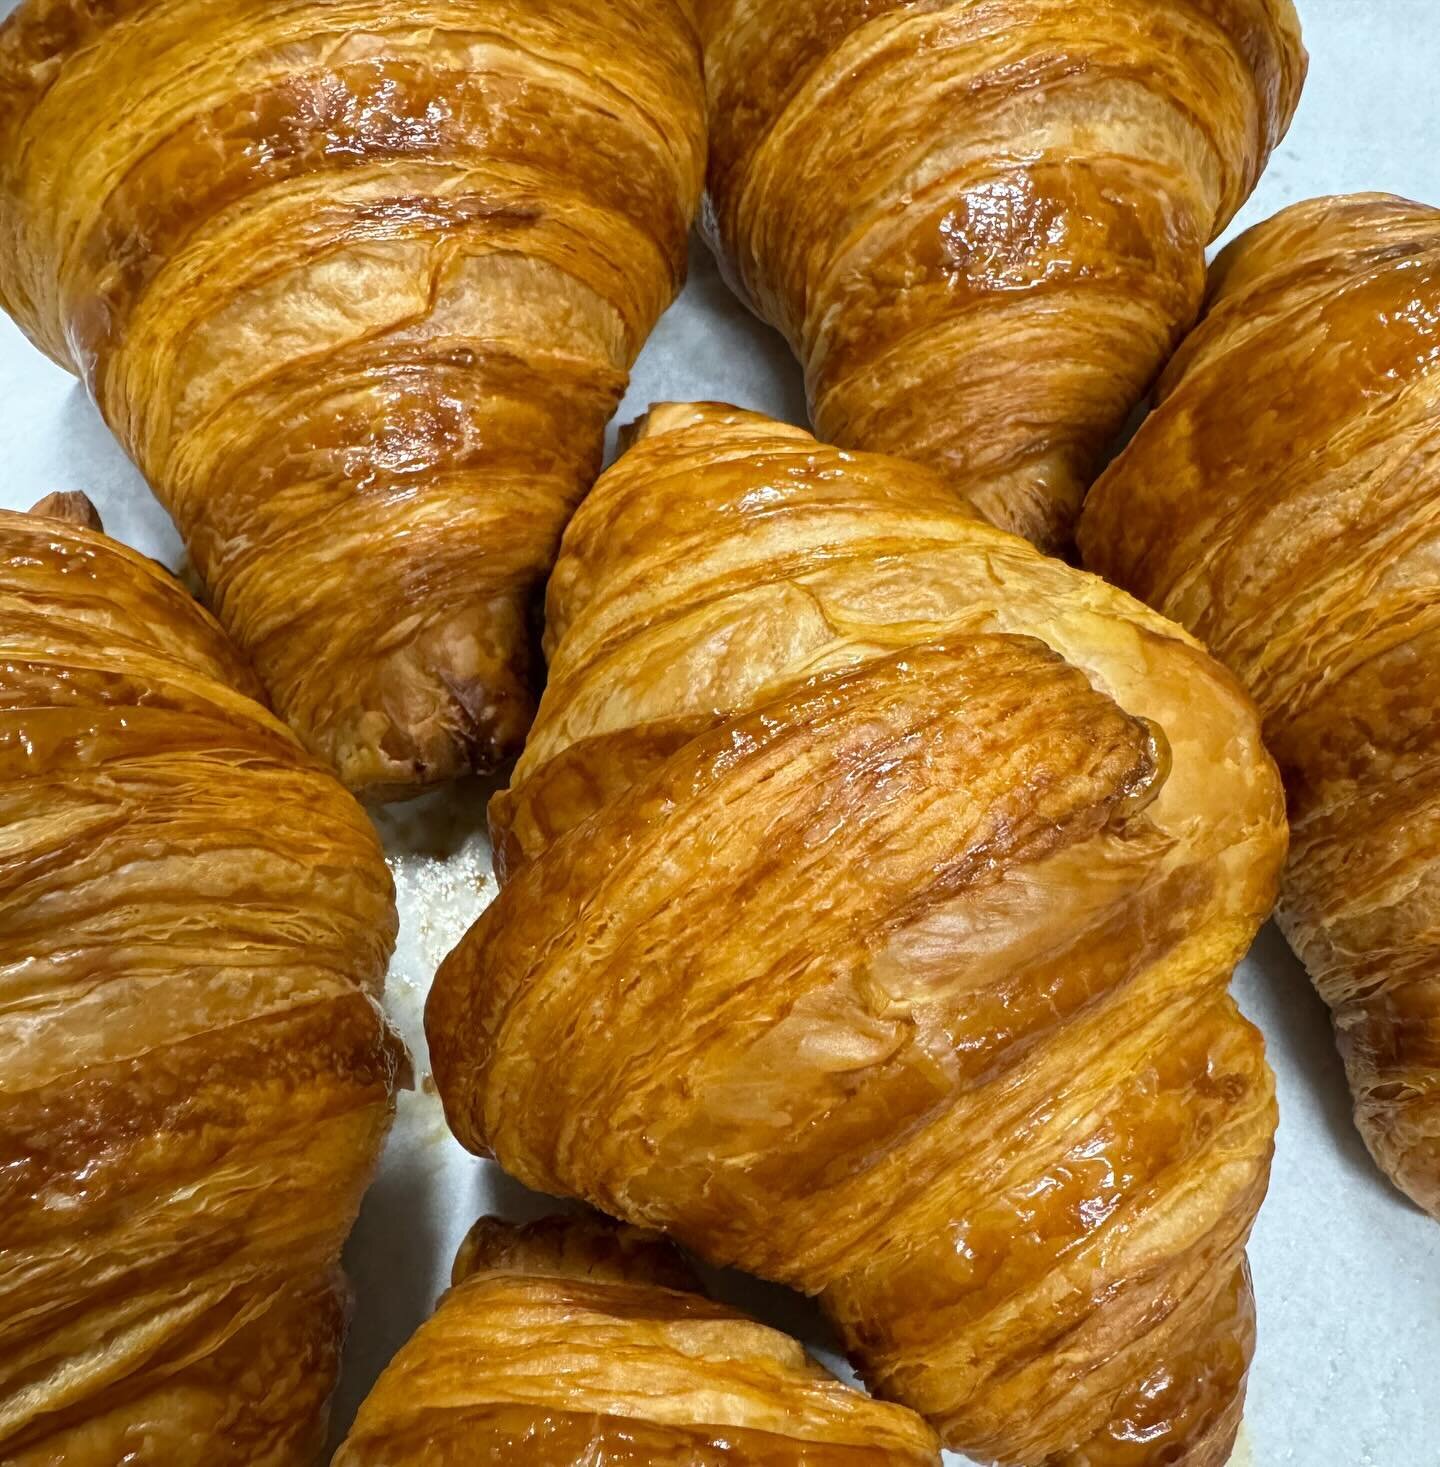 I just heard it&rsquo;s Croissant Day! We didn&rsquo;t know because we were too busy making croissants. Happy Croissant Day!